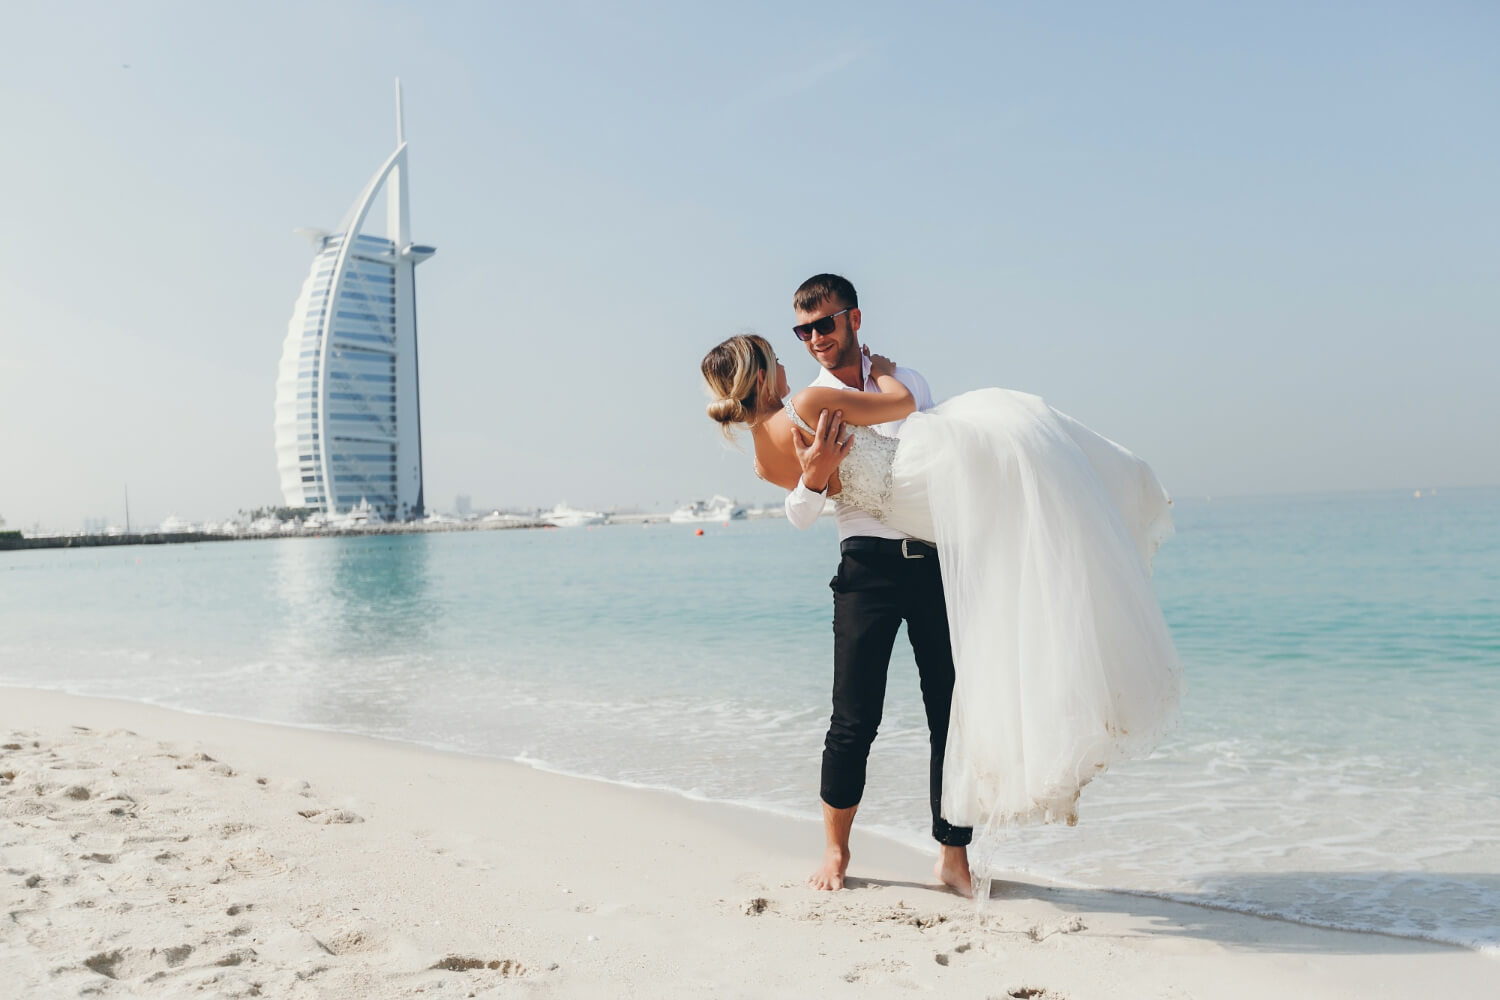 Planning a Luxury Honeymoon in Dubai - A Guide For Guys - Global Playboy